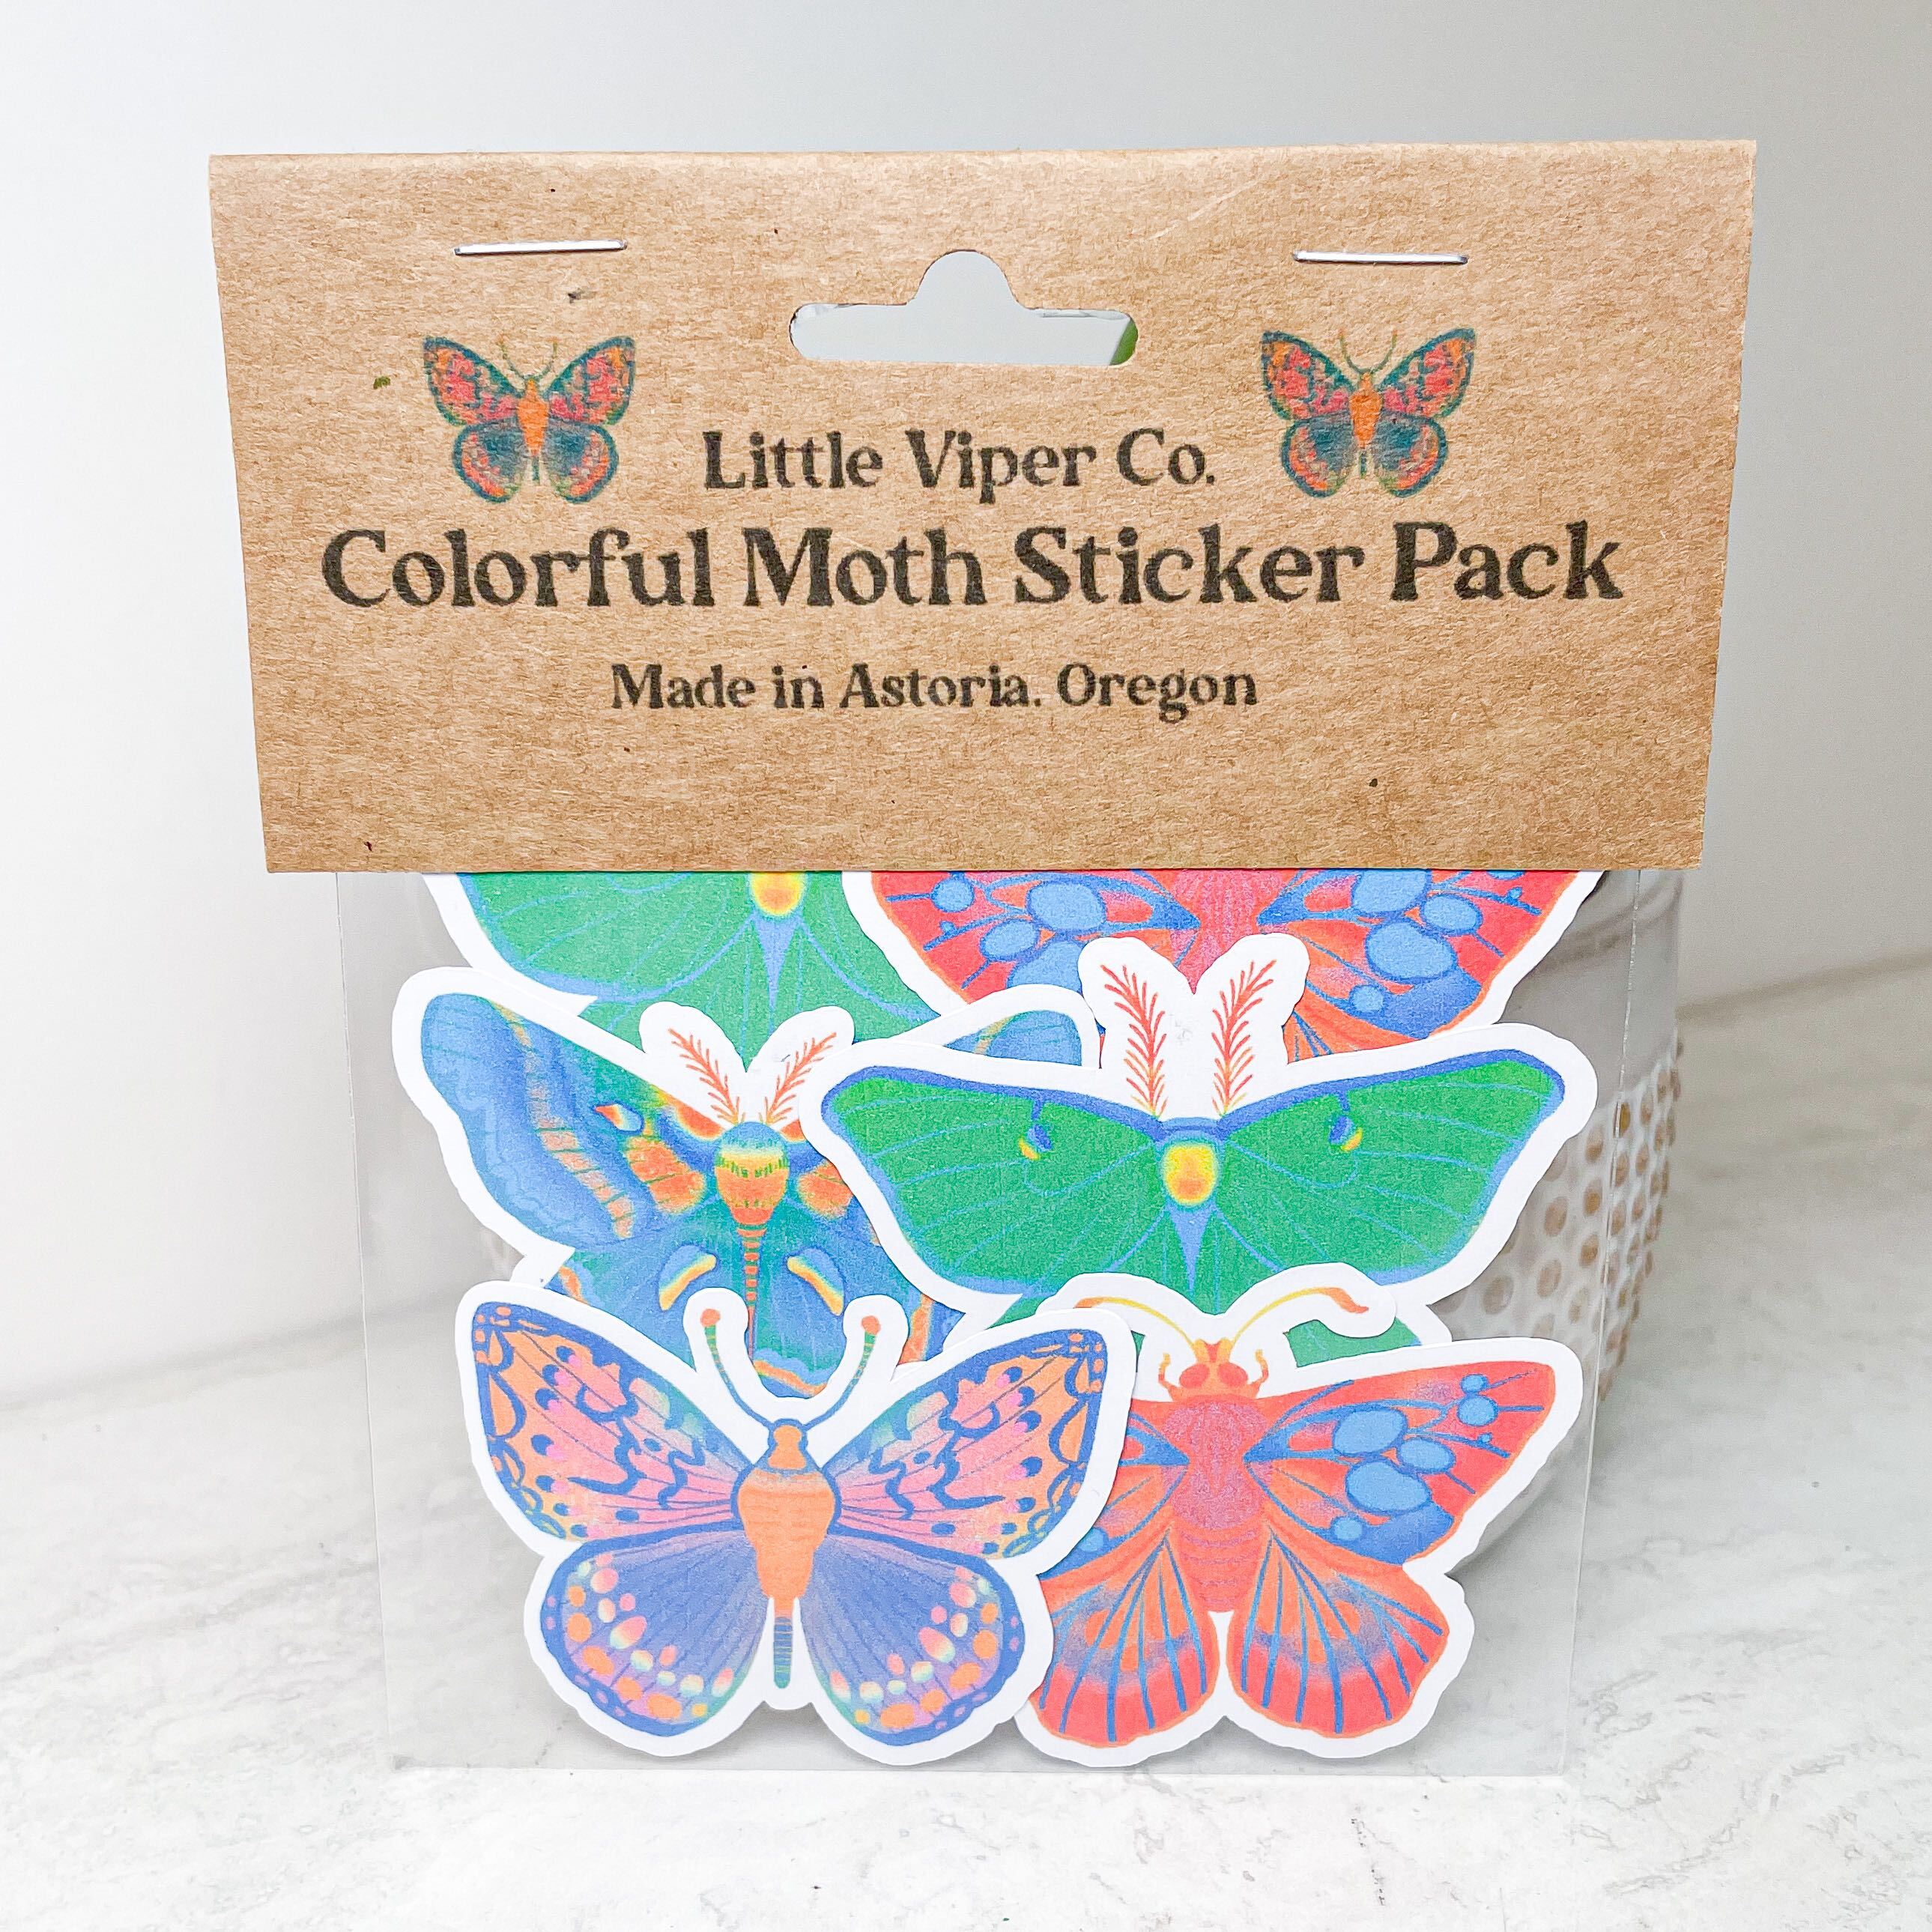 Colorful Moth Sticker pack